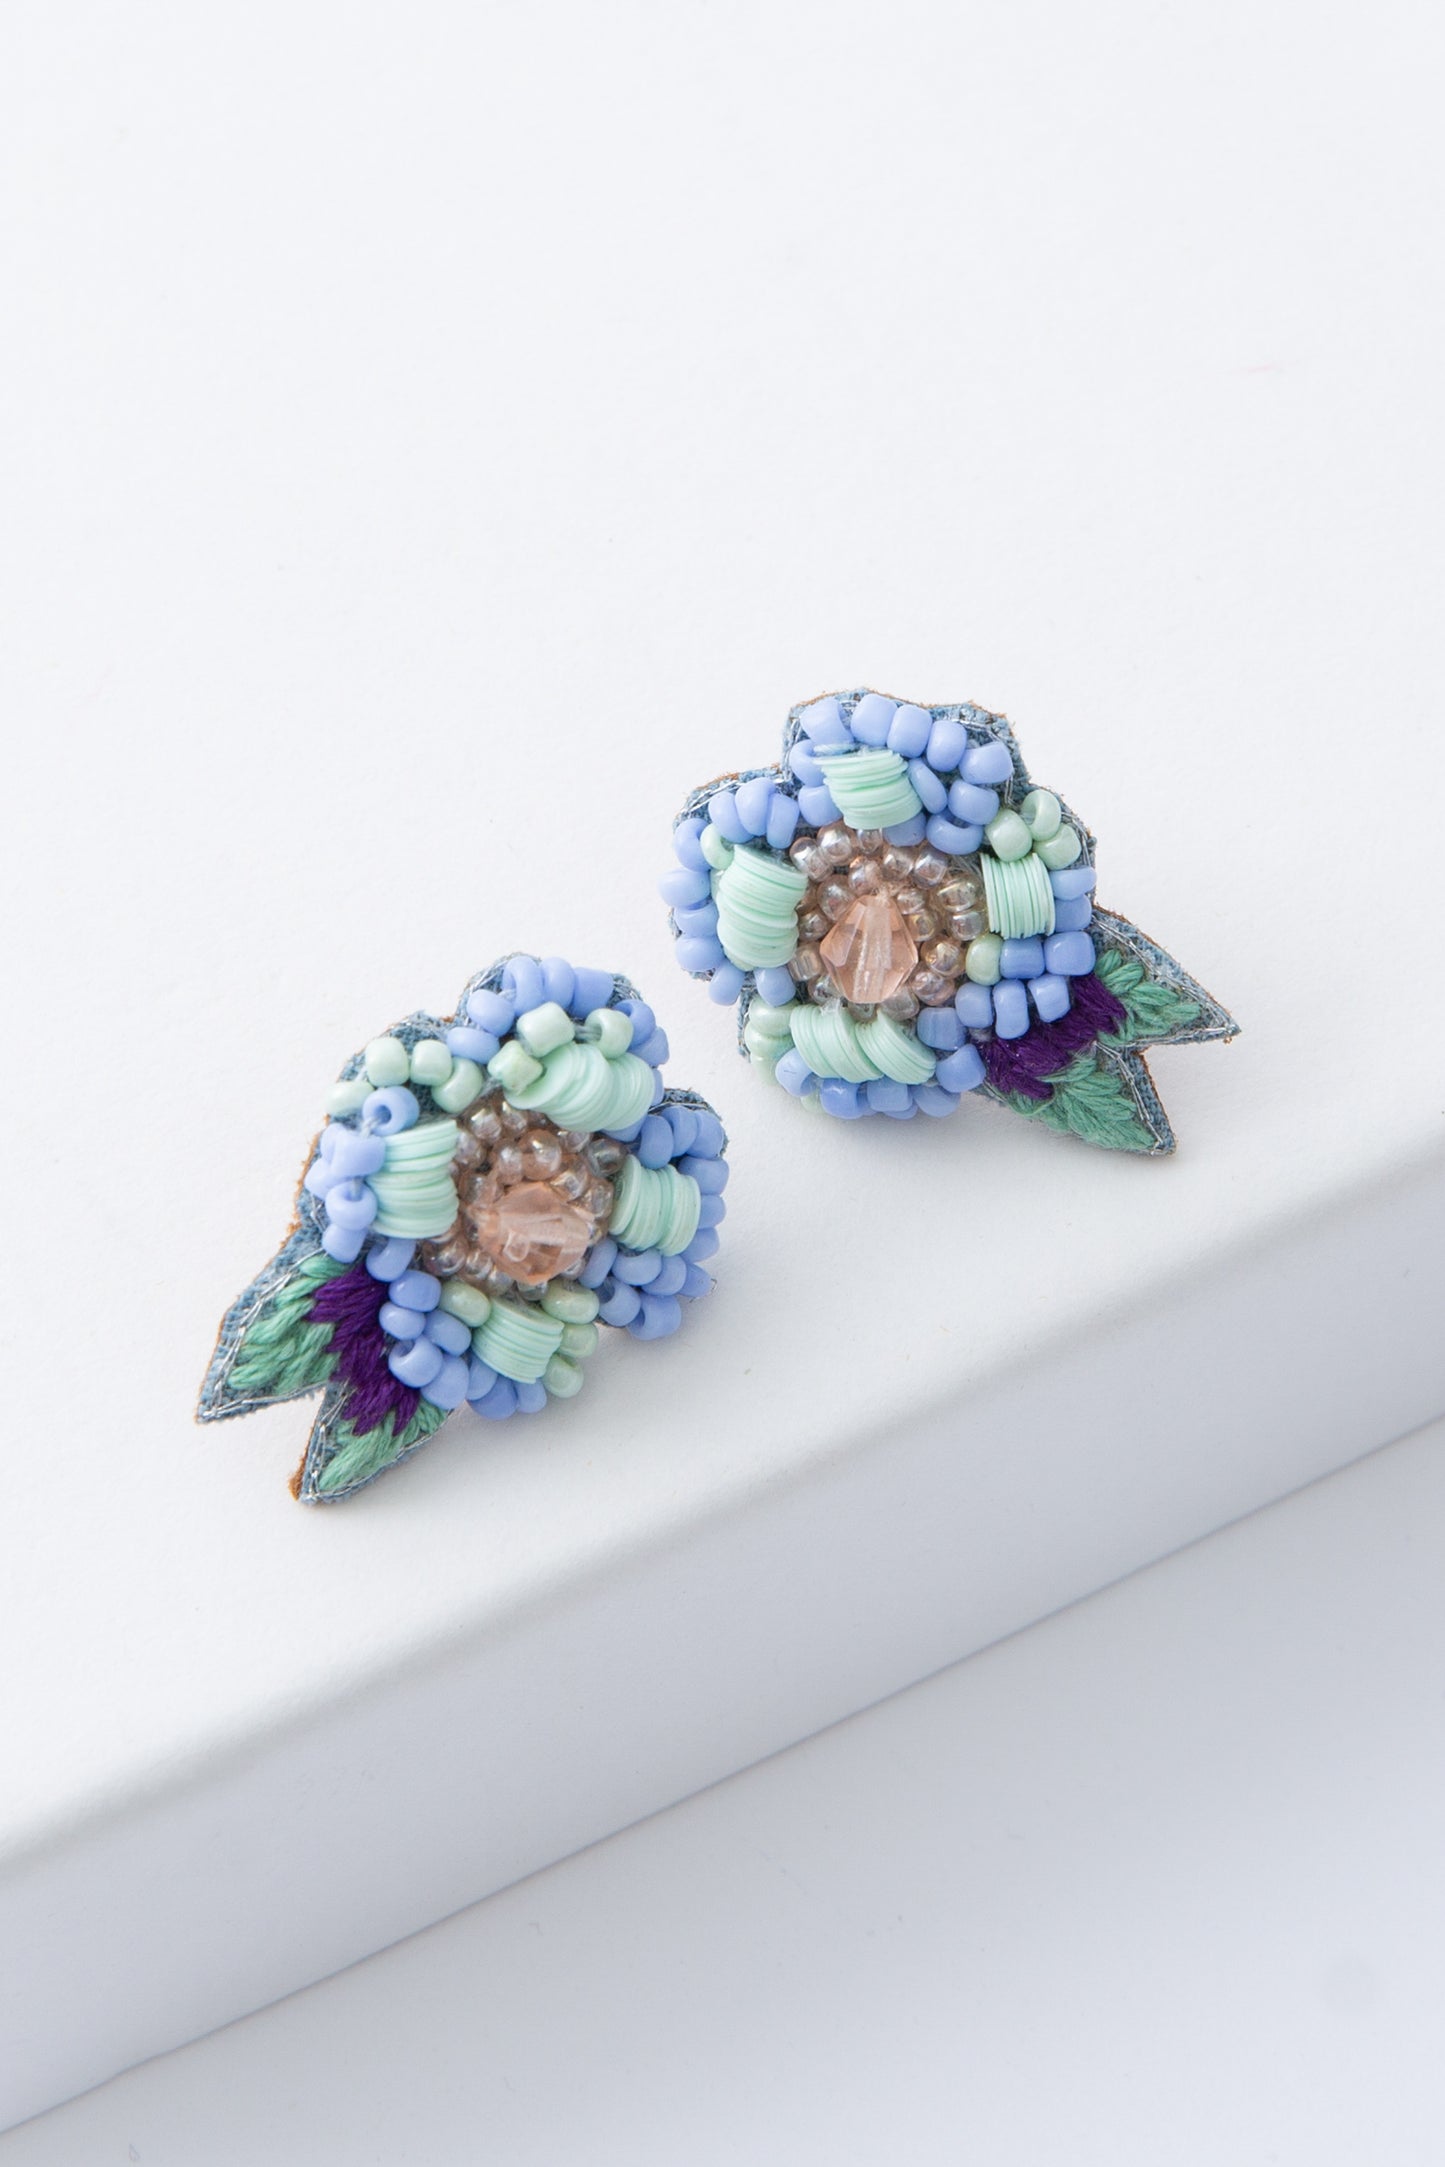 The Forget Me Knot Earrings are post style earrings shaped like blue flowers. The flower is composed of tiny glass beads and sequins in shades of light blue and mint. A cluster of gold beads and a blue colored faceted glass beads form the center of the flower. Two dainty leaves are formed from green and purple thread.